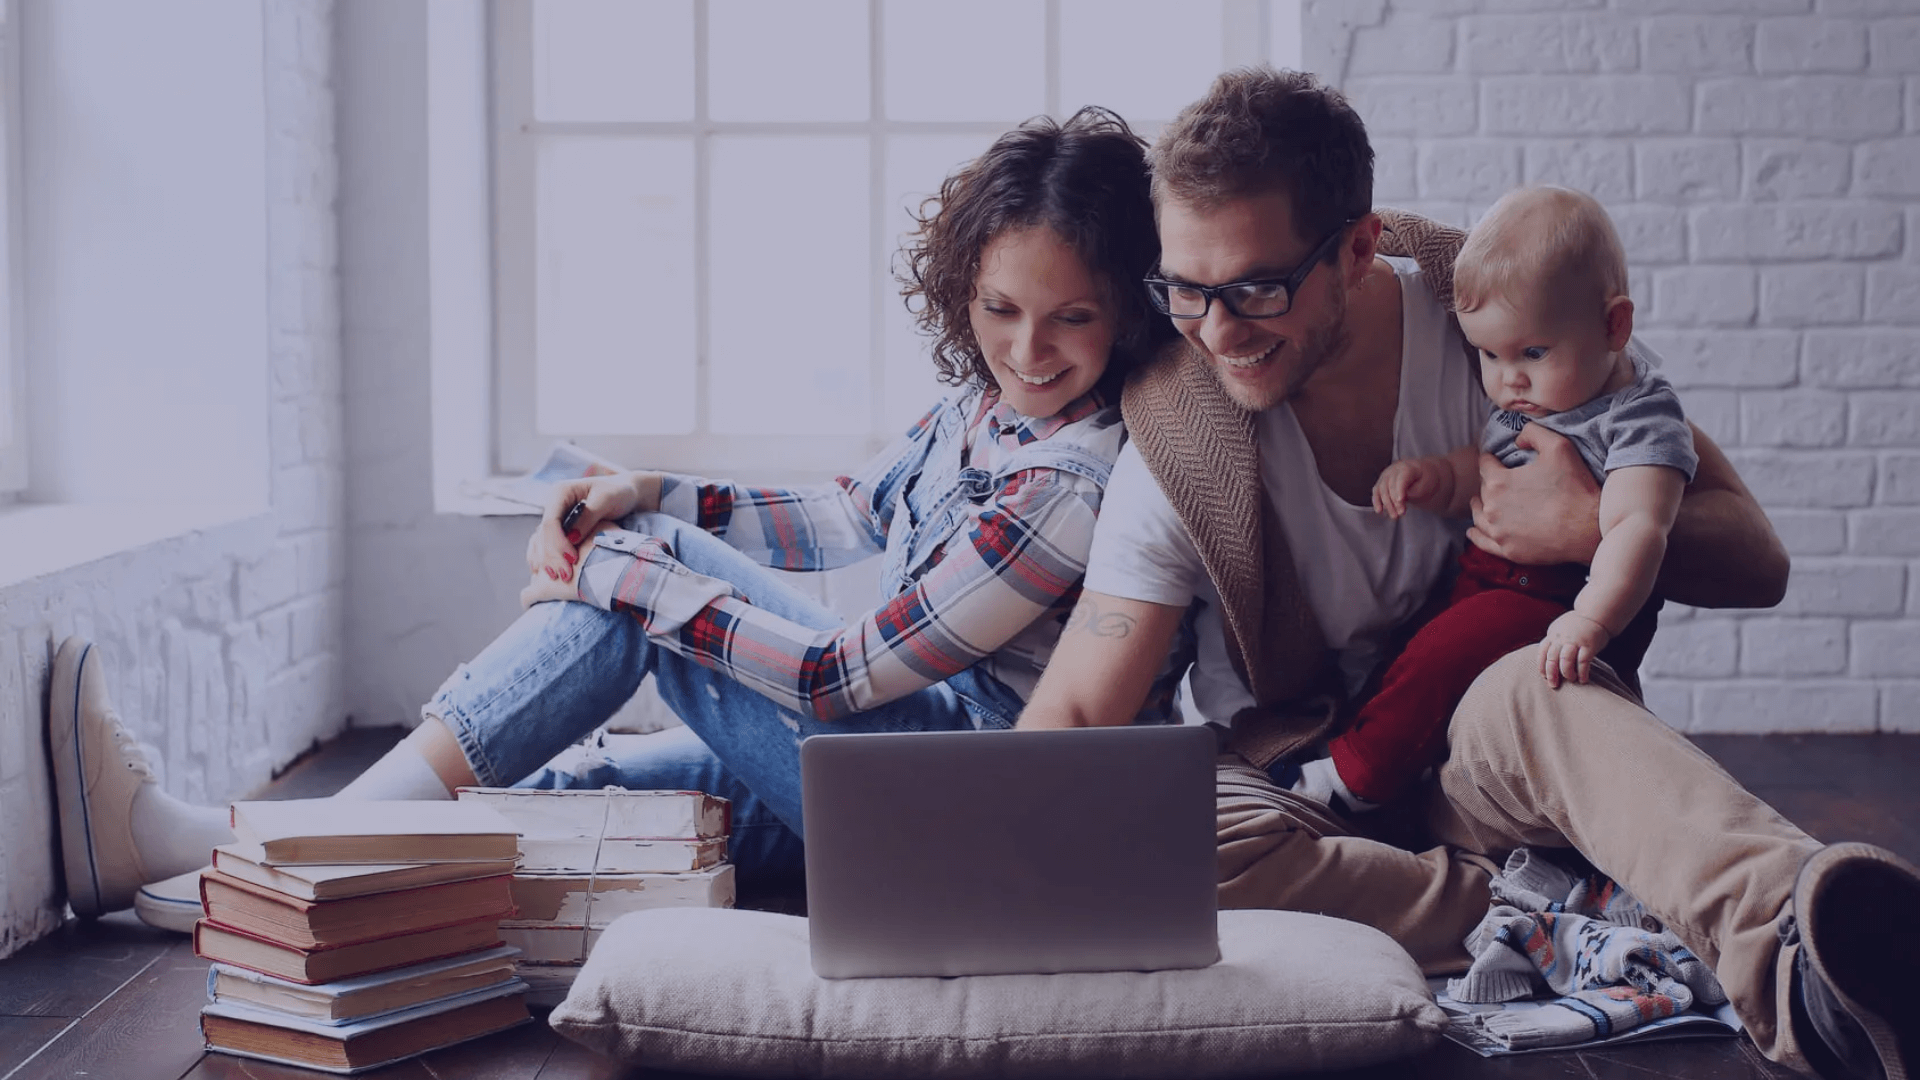 An image of a family. A man, a woman and a baby are looking at the computer with piles of books by them. different life stages and life insurance